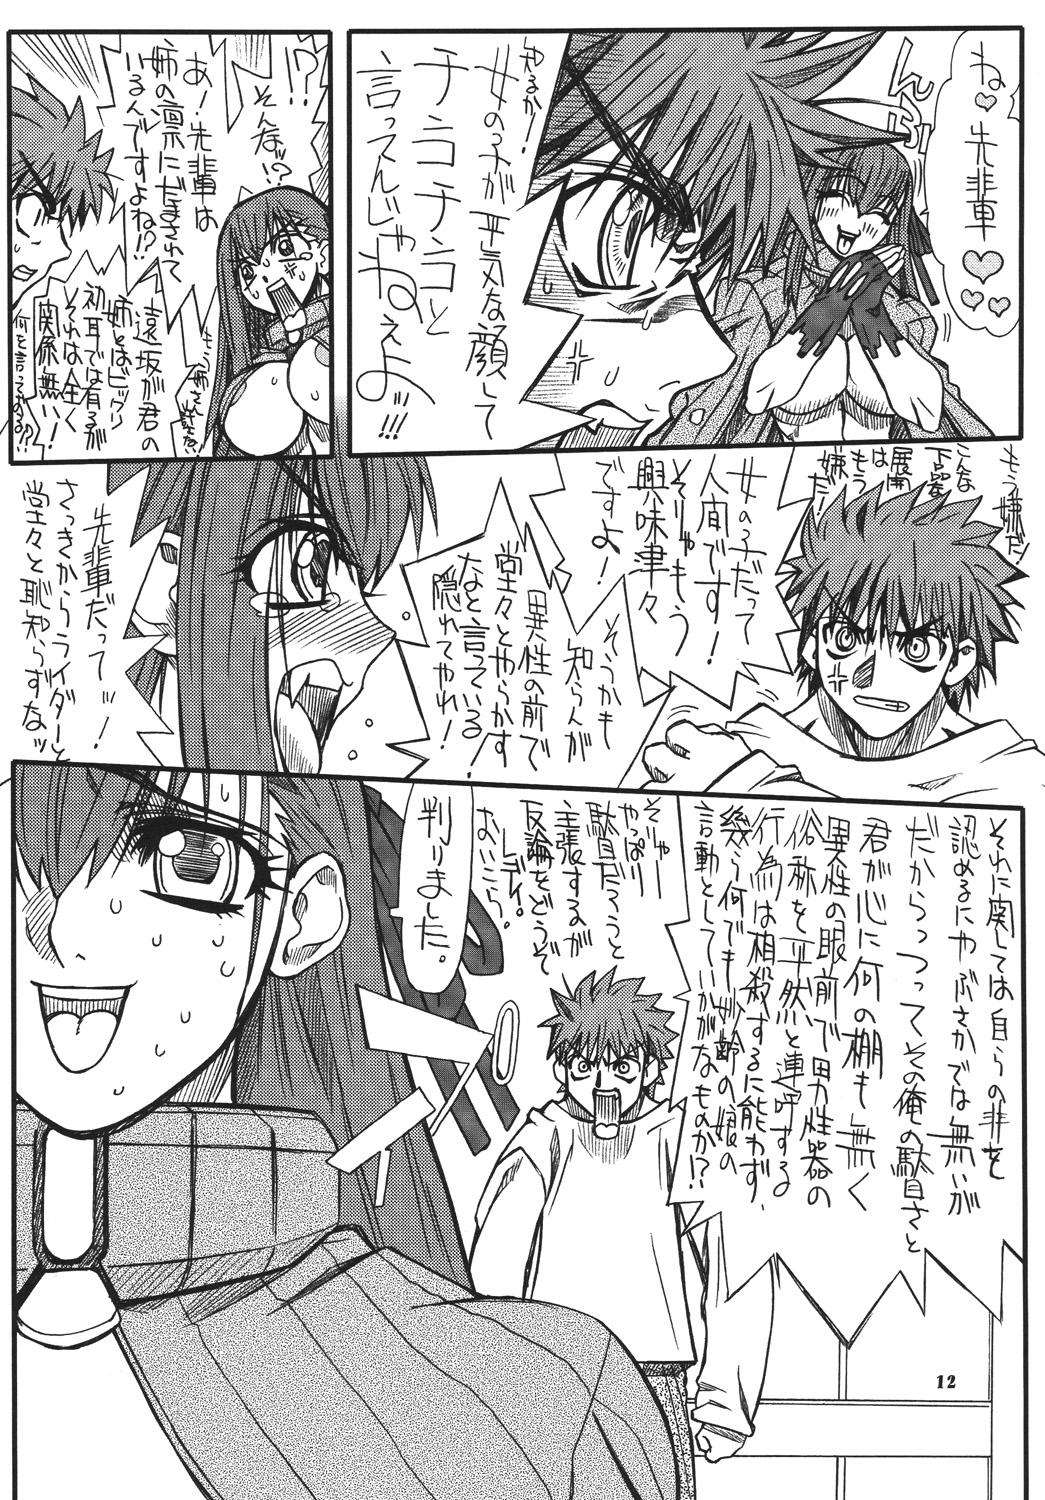 Family Akihime Yon - Fate stay night Teenager - Page 11